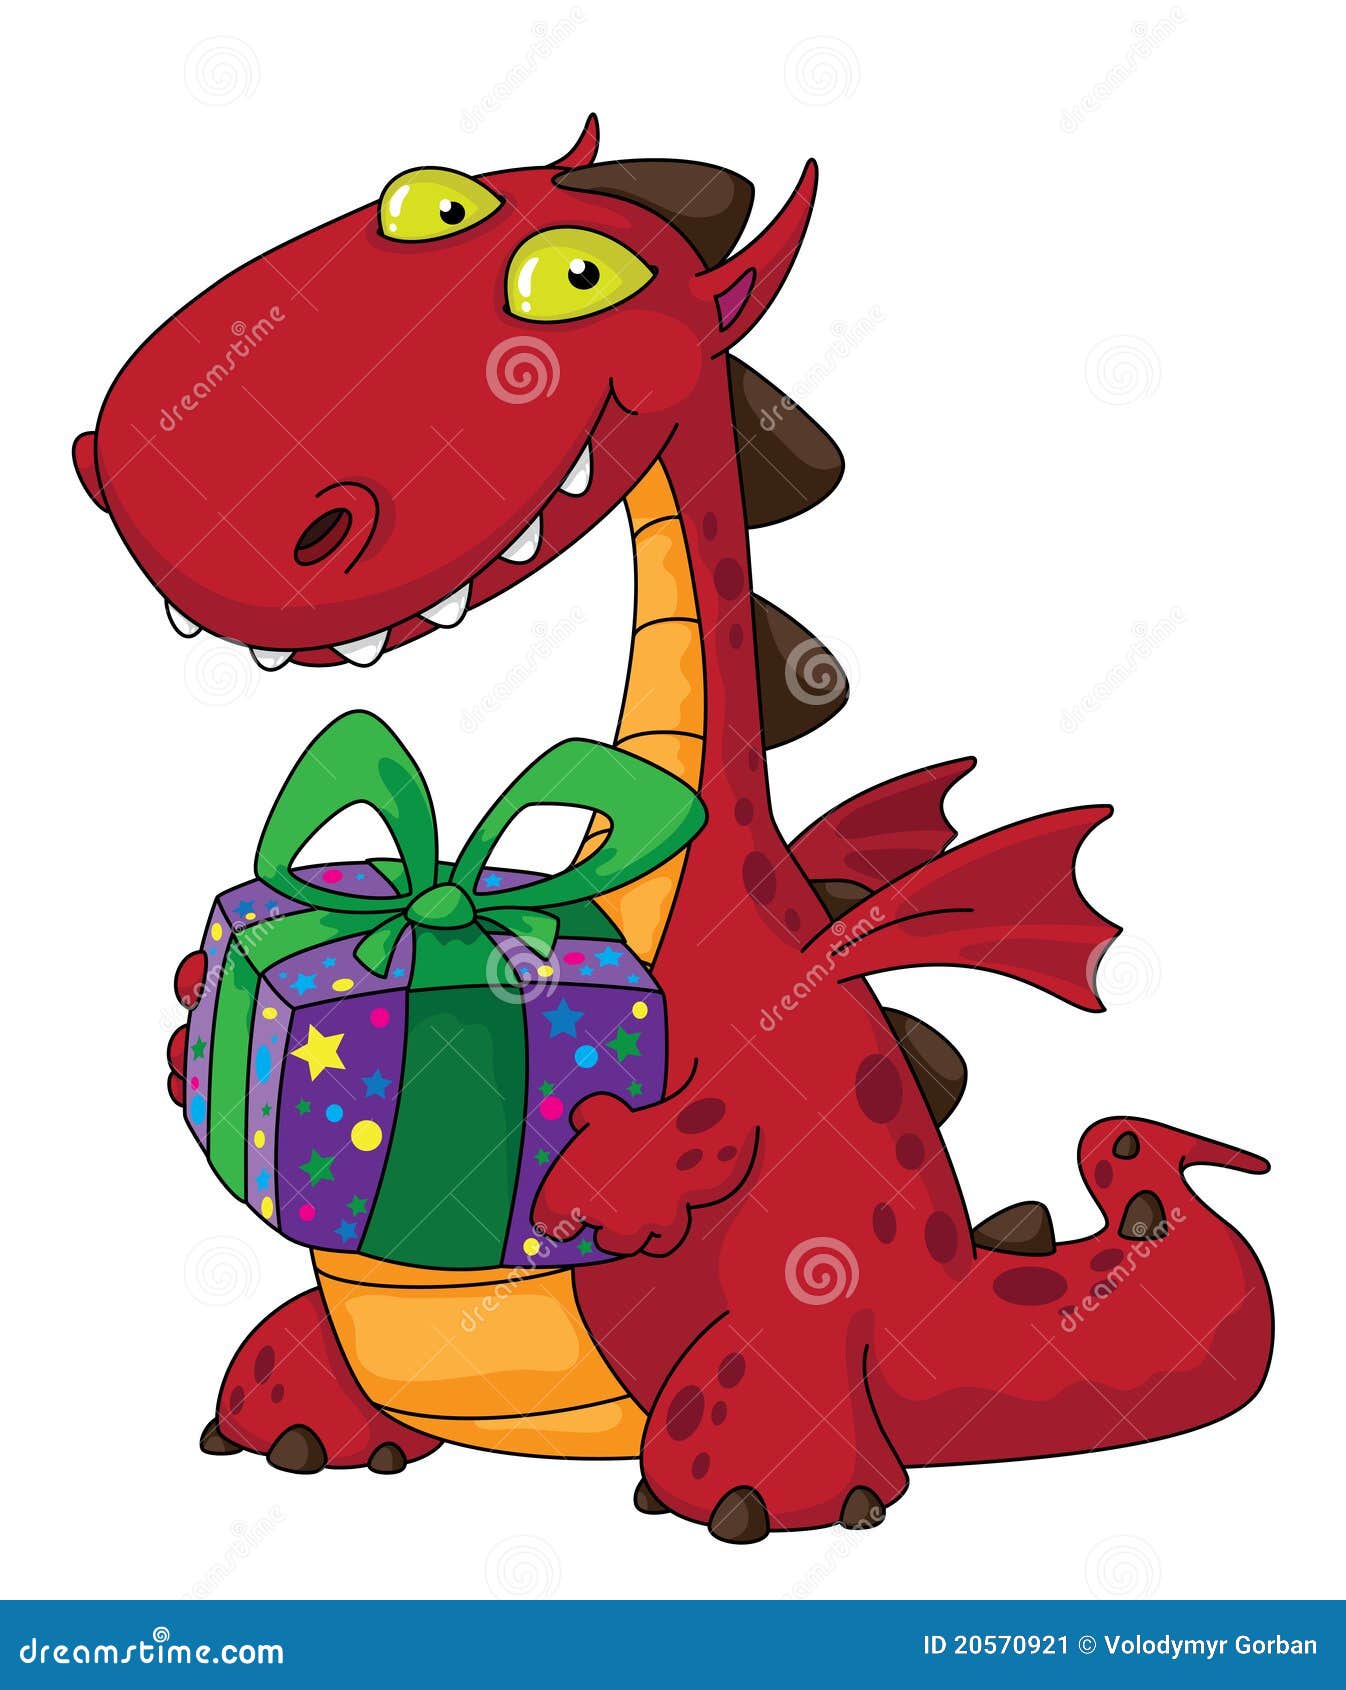 Dragon and a gift stock vector. Illustration of fairy - 20570921